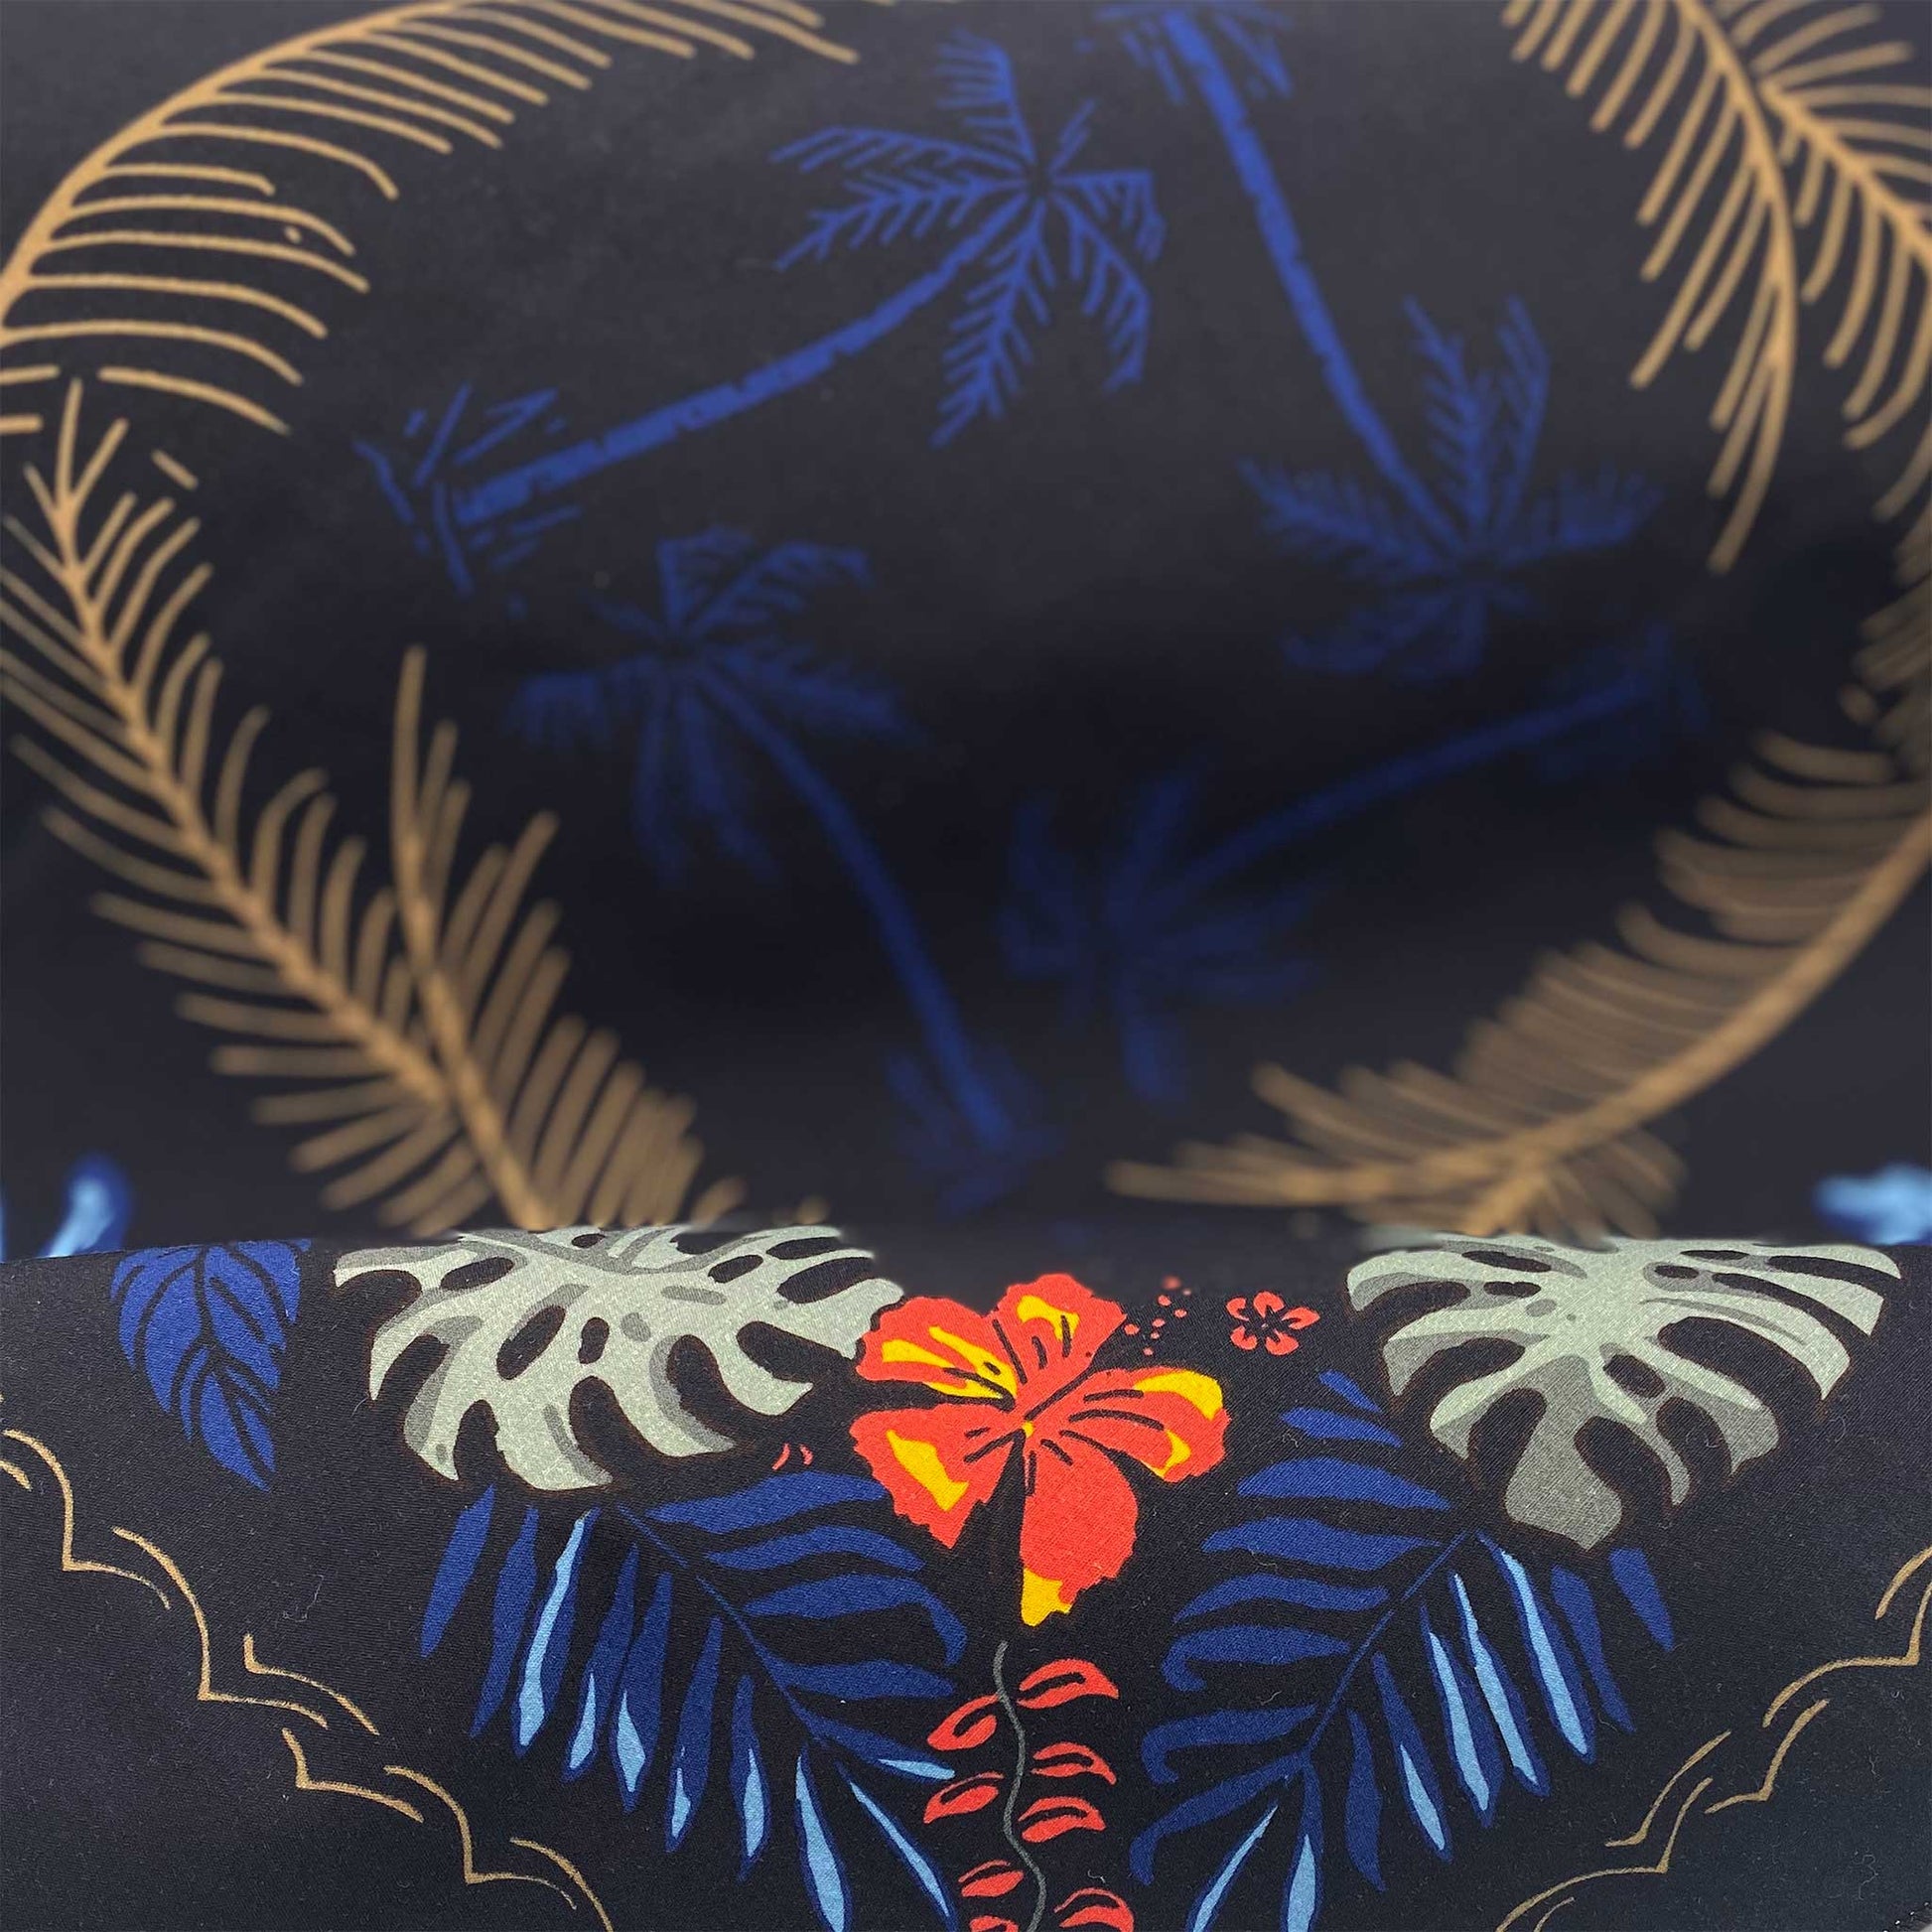 The BALI HIGH Hawaiian bandana. You navigate by the moon. You steer your ship by the stars. This dark and stormy bandana will fill your sails with a mighty wind. Details: Size: 22" x 22" Material: 100% cotton, water-based inks. Cotton milled in South Carolina, printed in New York. Made in the USA 🇺🇸 